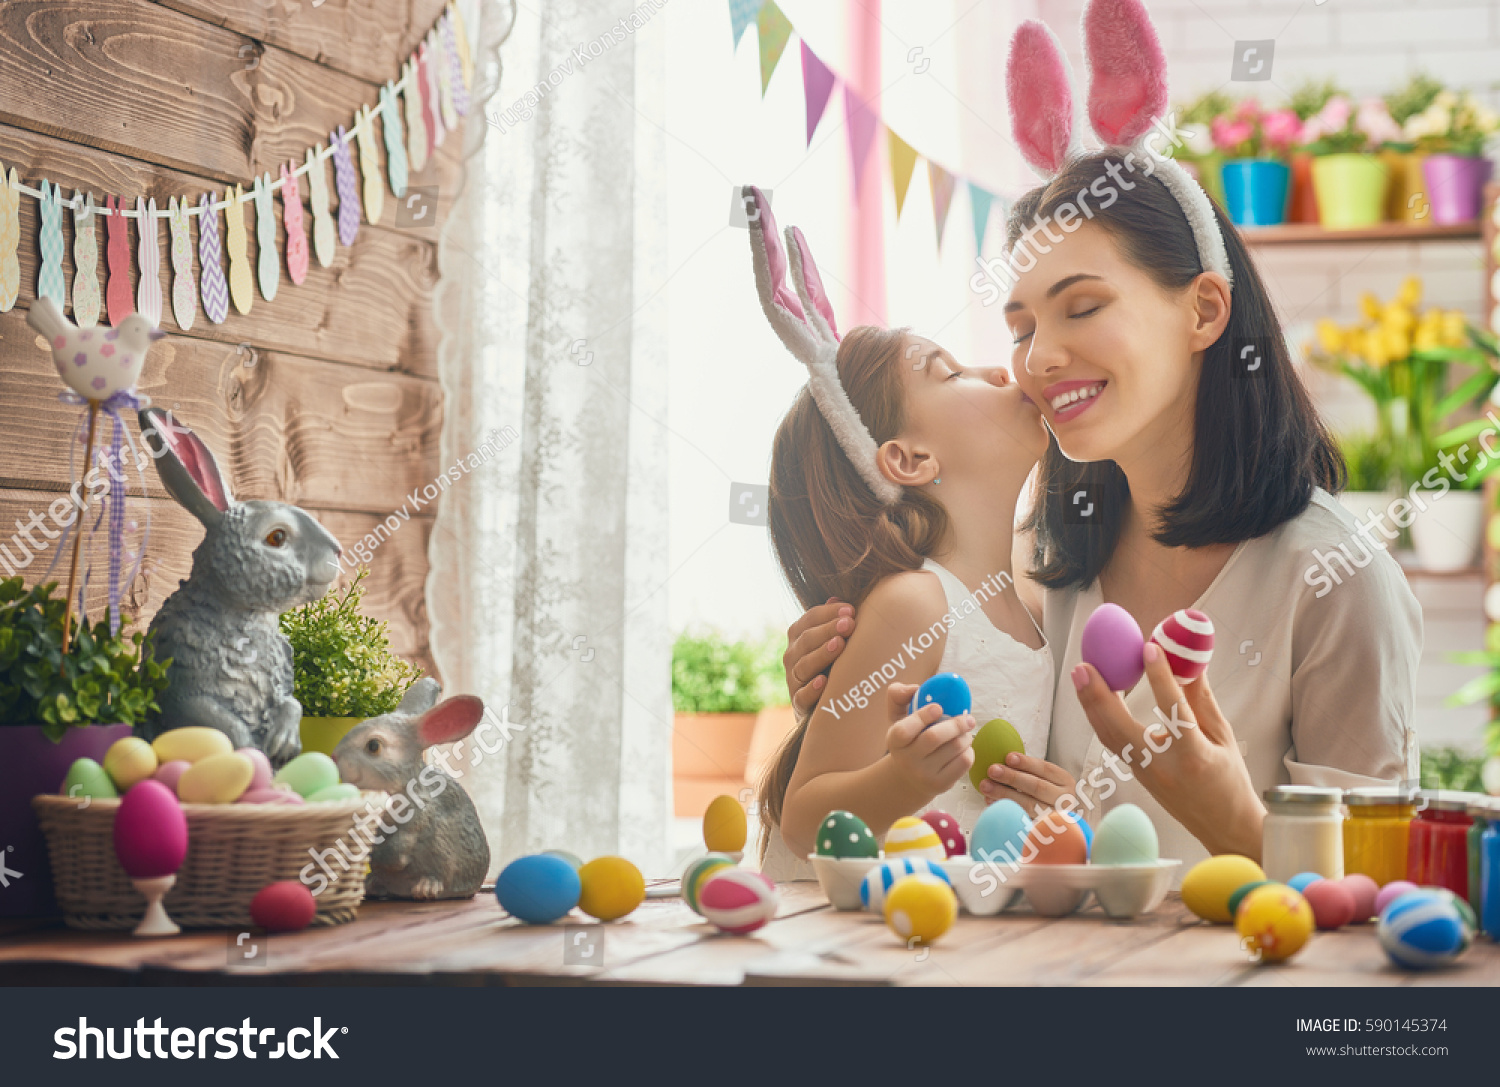 Mother and her daughter painting eggs. Happy family preparing for Easter. Cute little child girl wearing bunny ears. #590145374